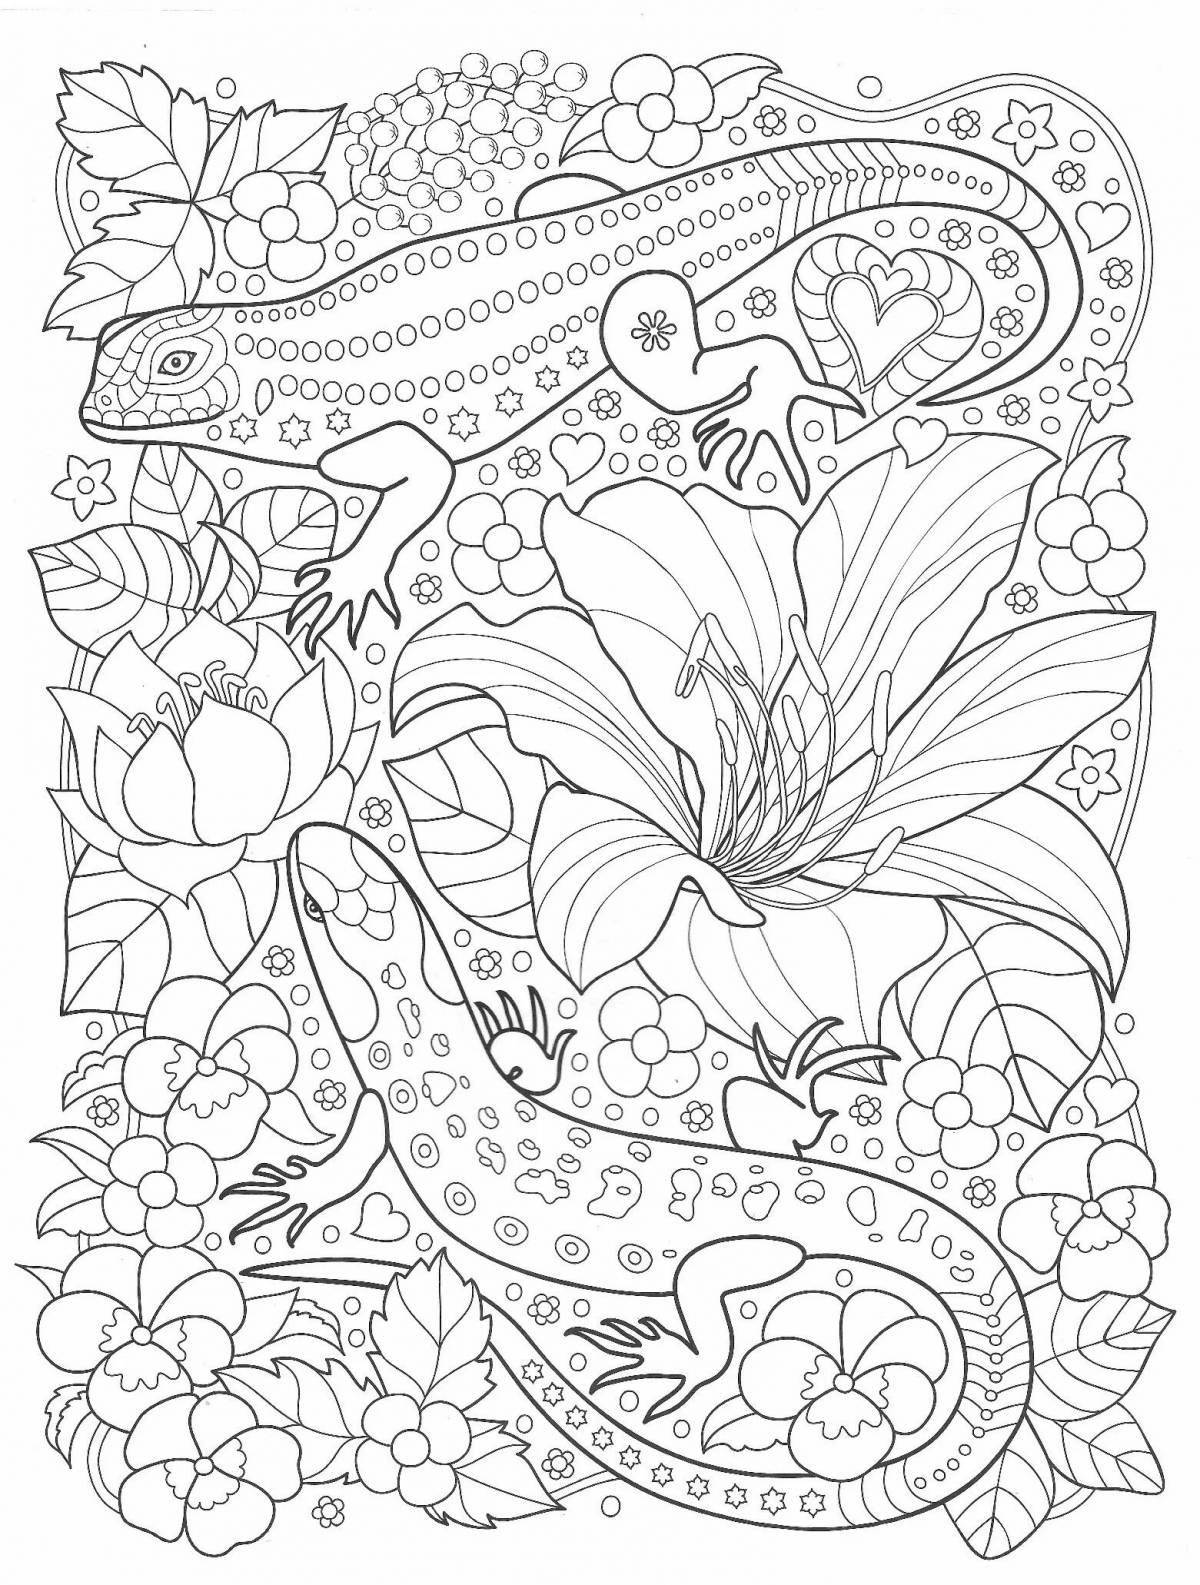 Radiant coloring page relax для детей